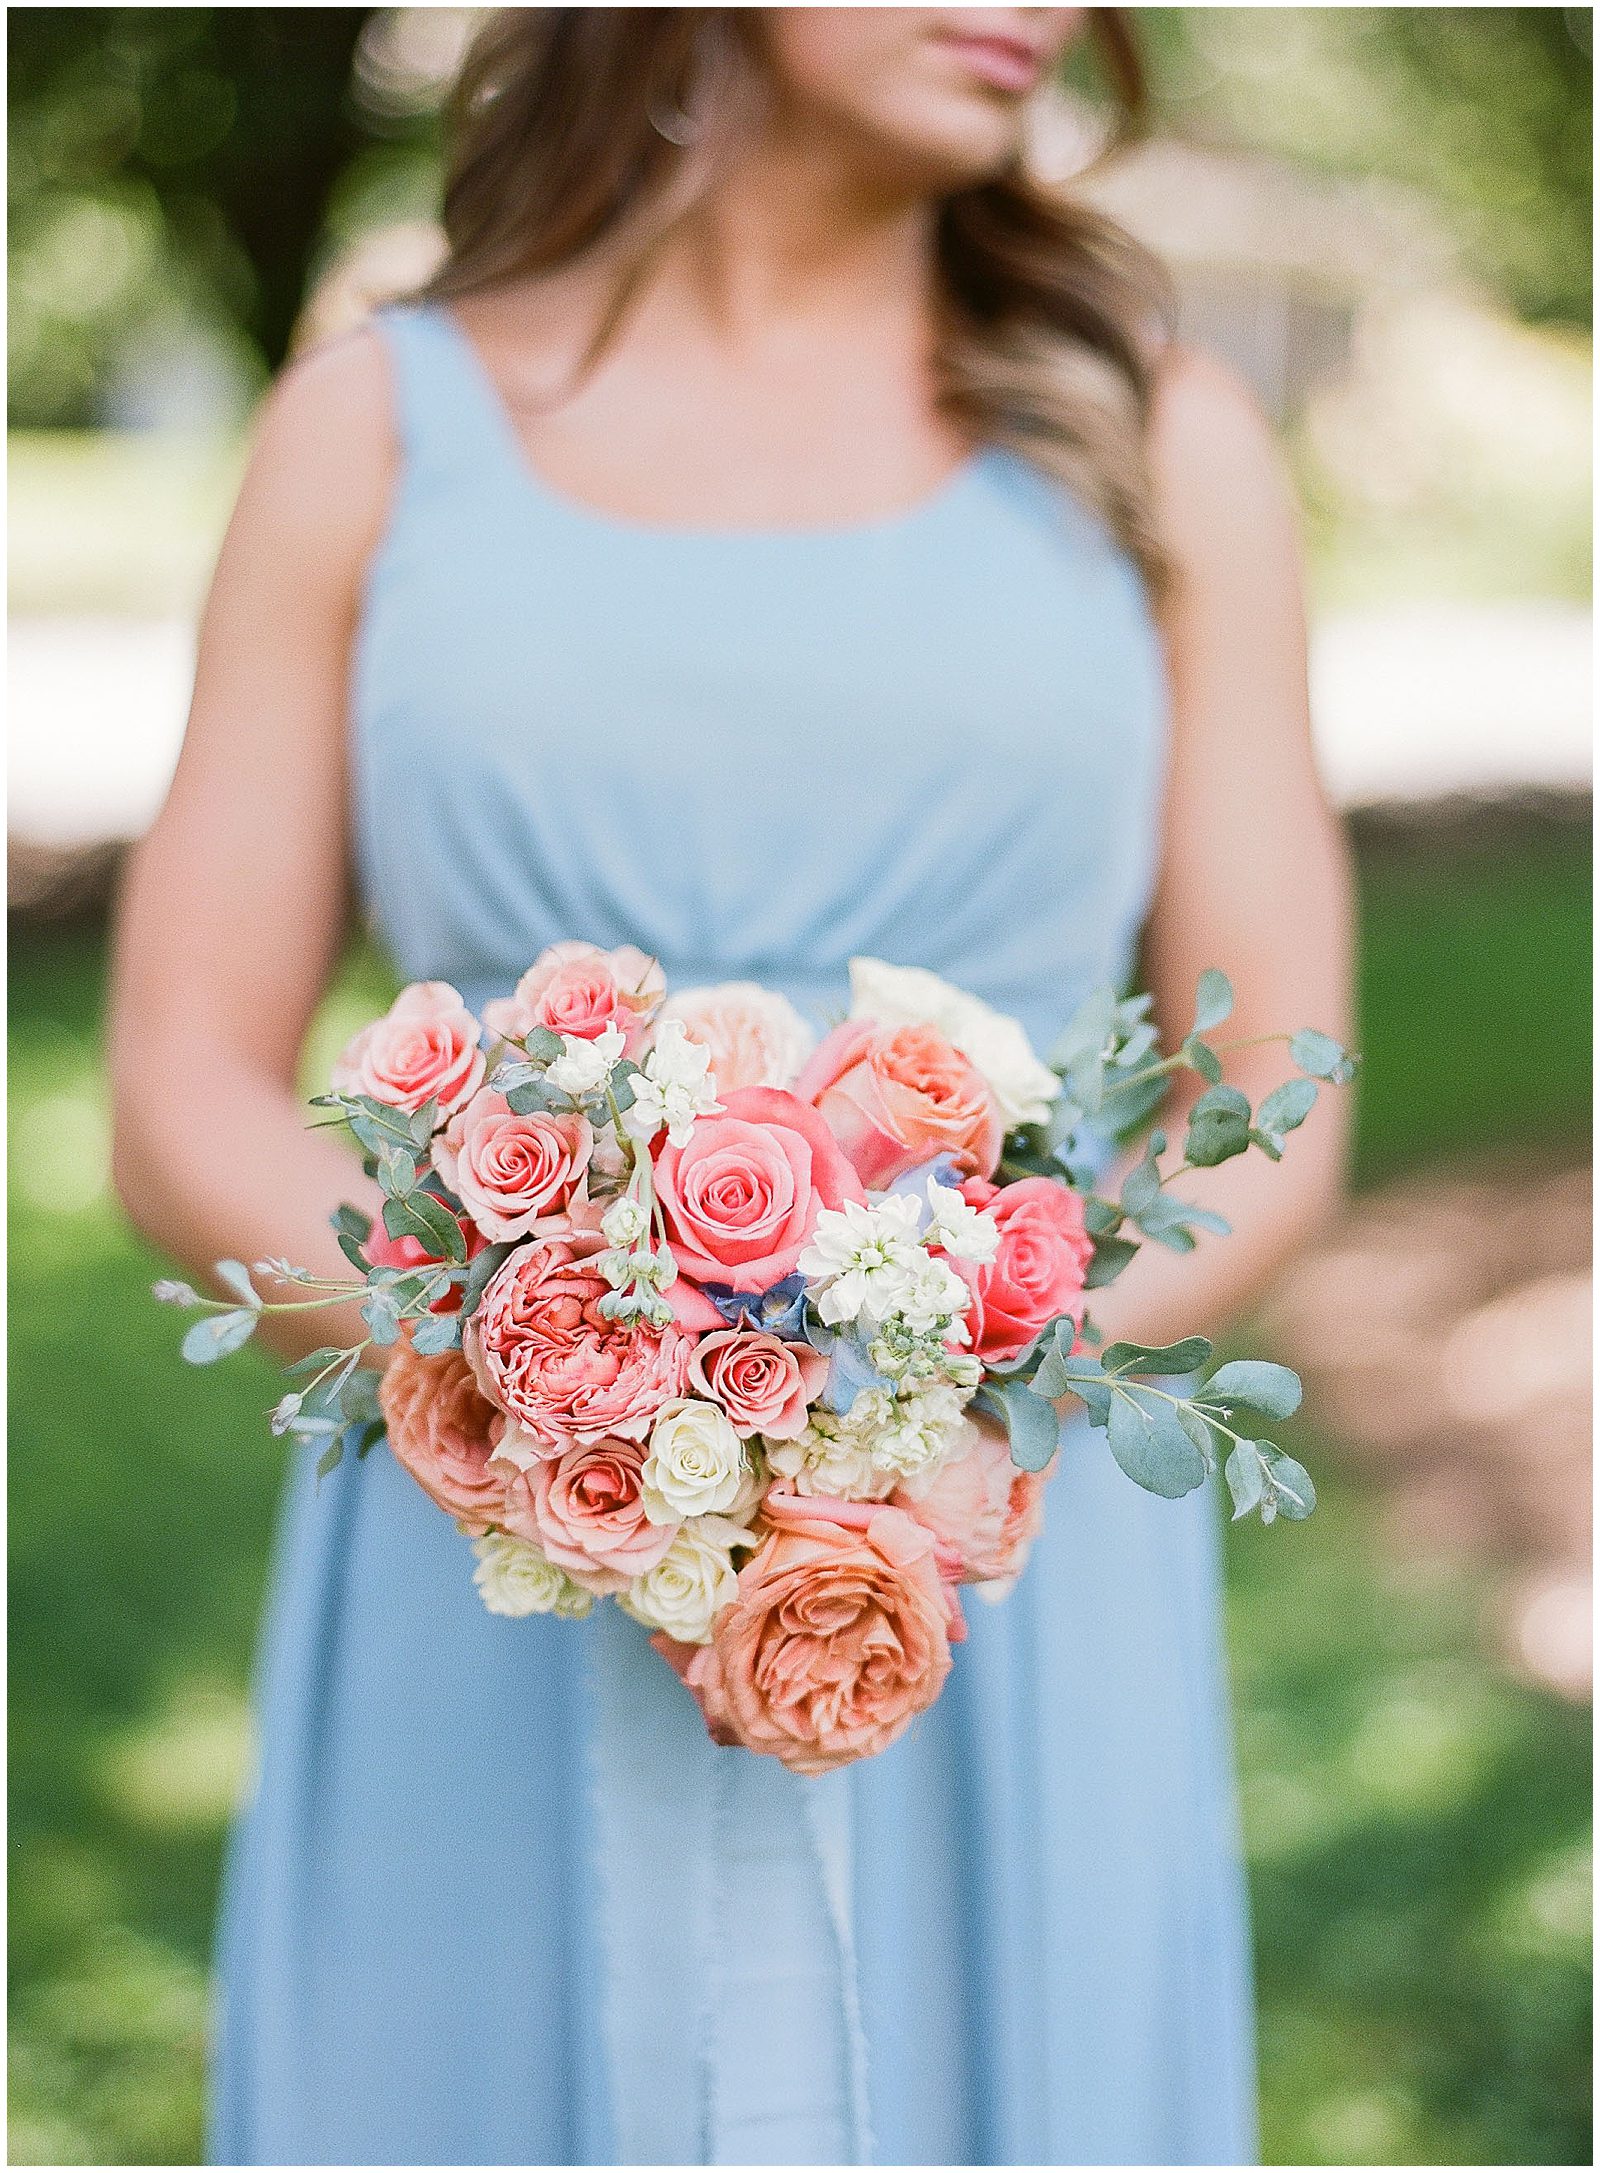 Detail of Bridesmaid Holding Bouquet Photo